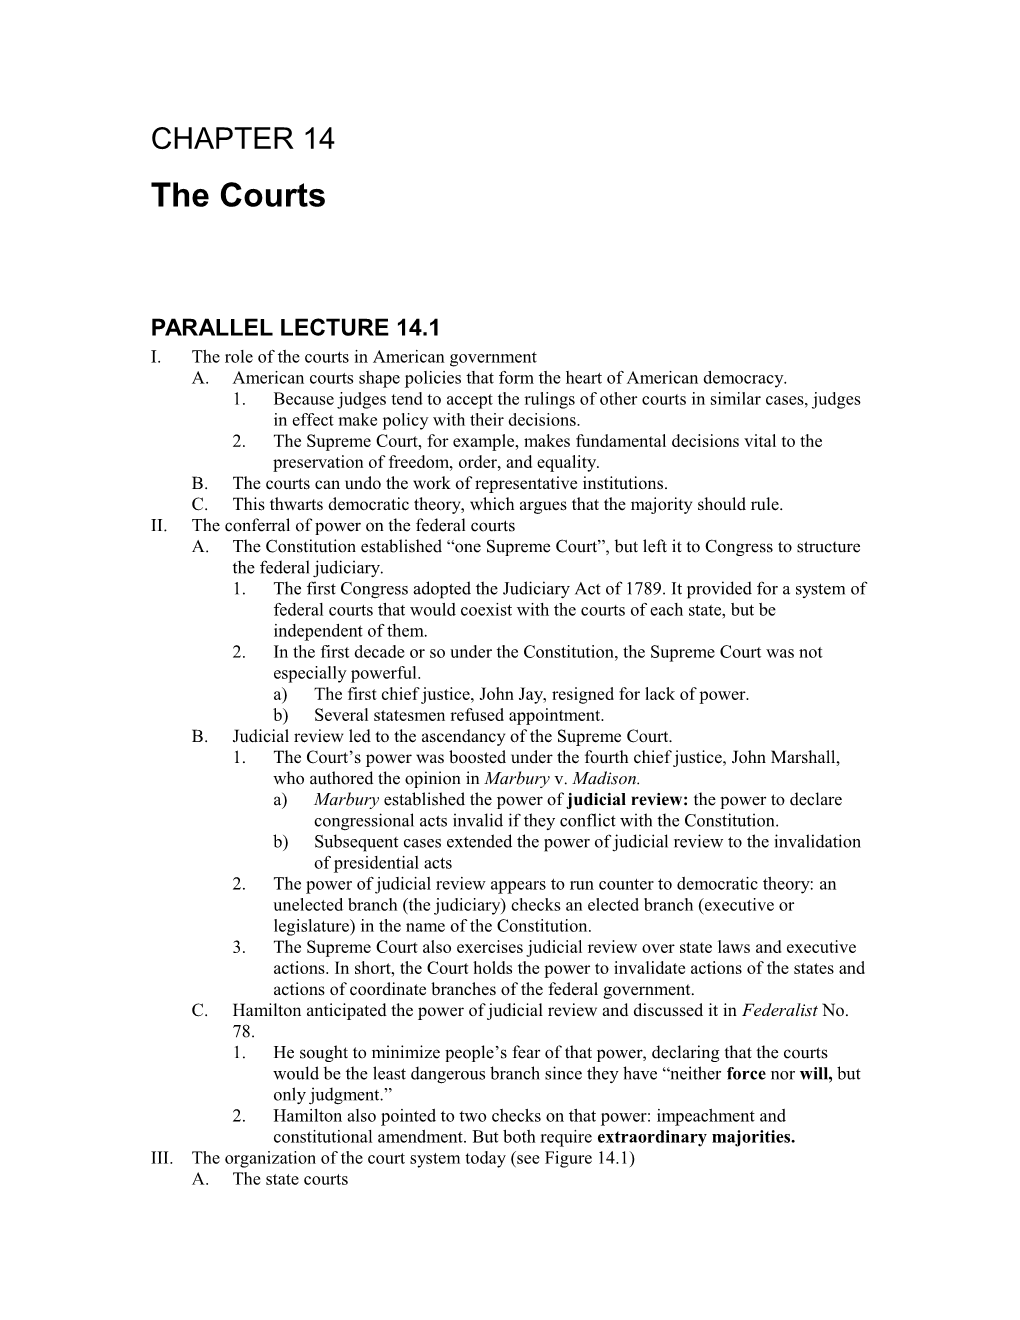 Parallel Lecture 14.1